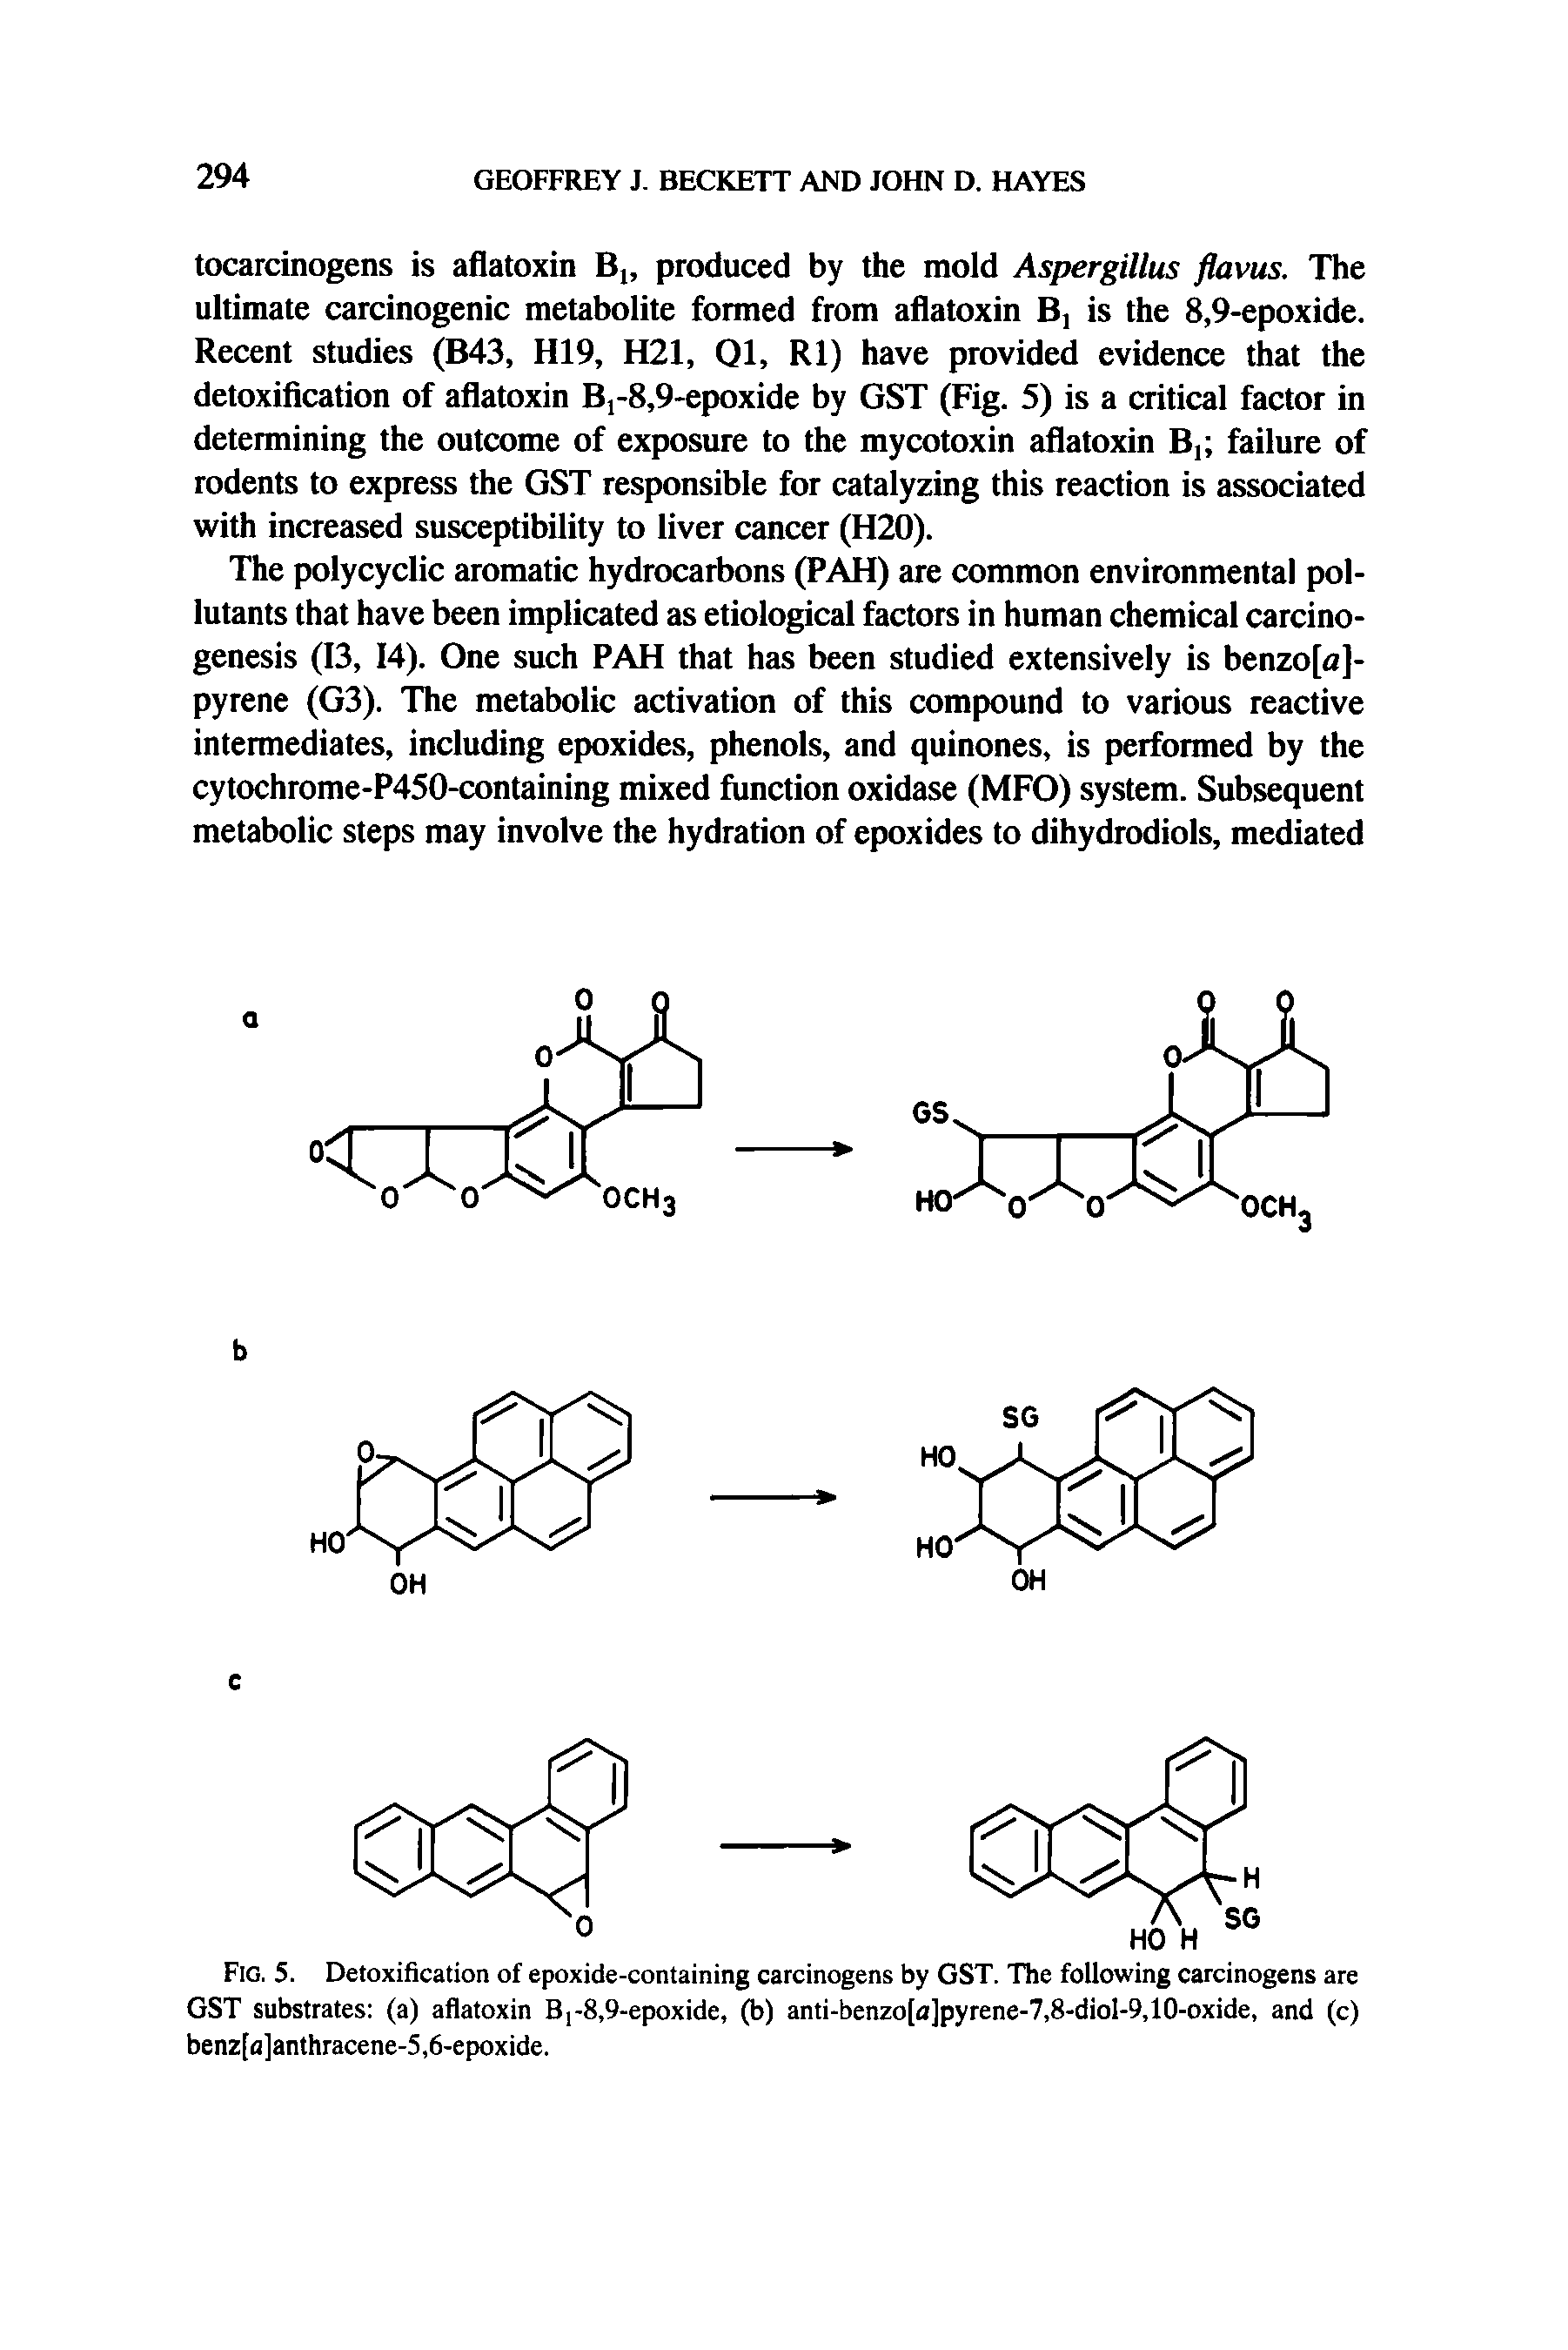 Fig. 5. Detoxification of epoxide-containing carcinogens by GST. The following carcinogens are GST substrates (a) aflatoxin Bj-8,9-epoxide, (b) anti-benzo[a]pyrene-7,8-diol-9,10-oxide, and (c) benz[fl]anthracene-5,6-epoxide.